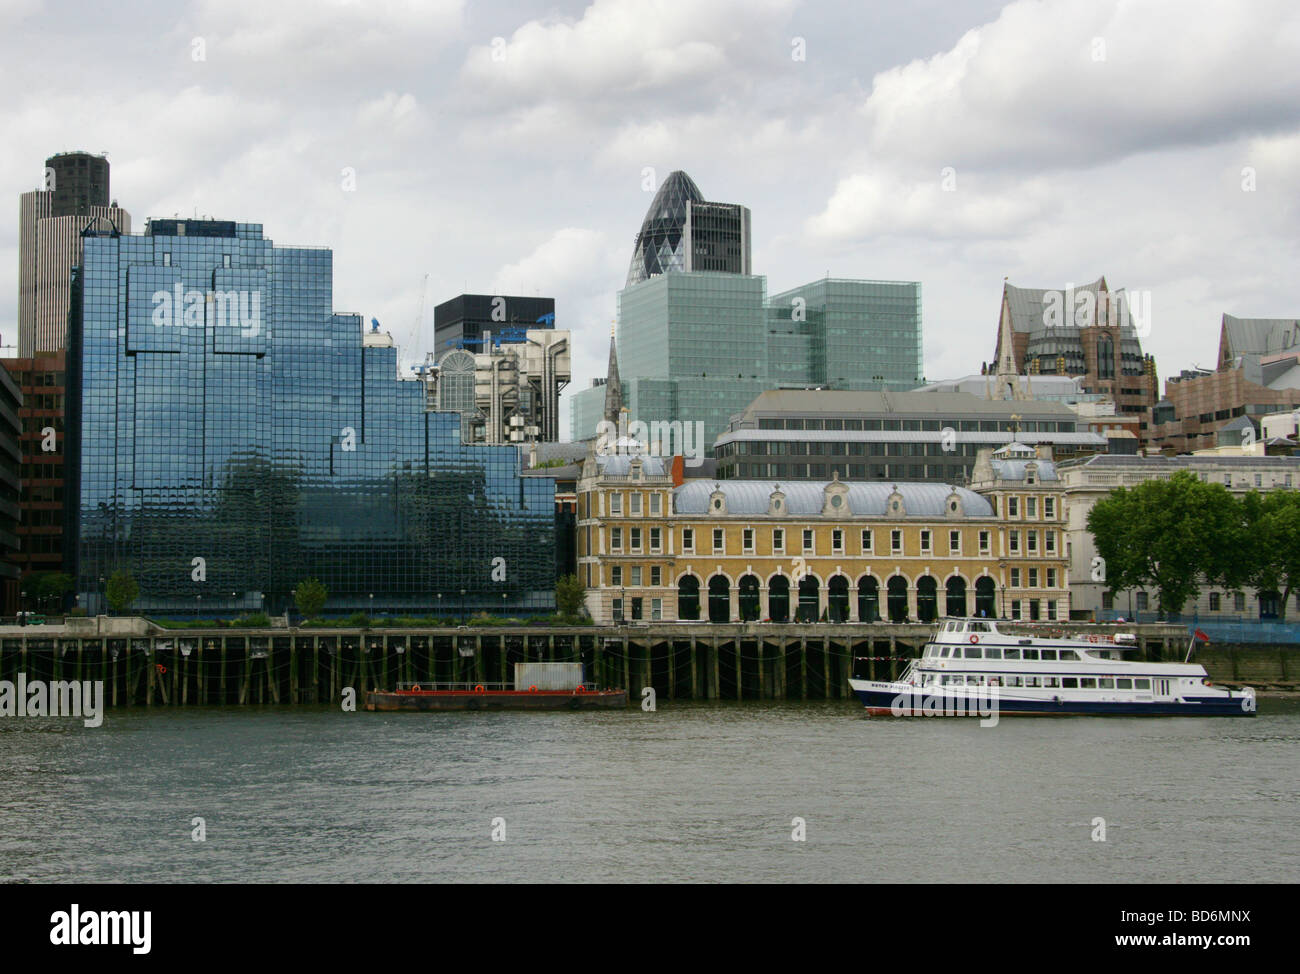 Old Billingsgate Fish Market and Northern and Shell Building, River Thames, from the Southbank, London, UK. Stock Photo